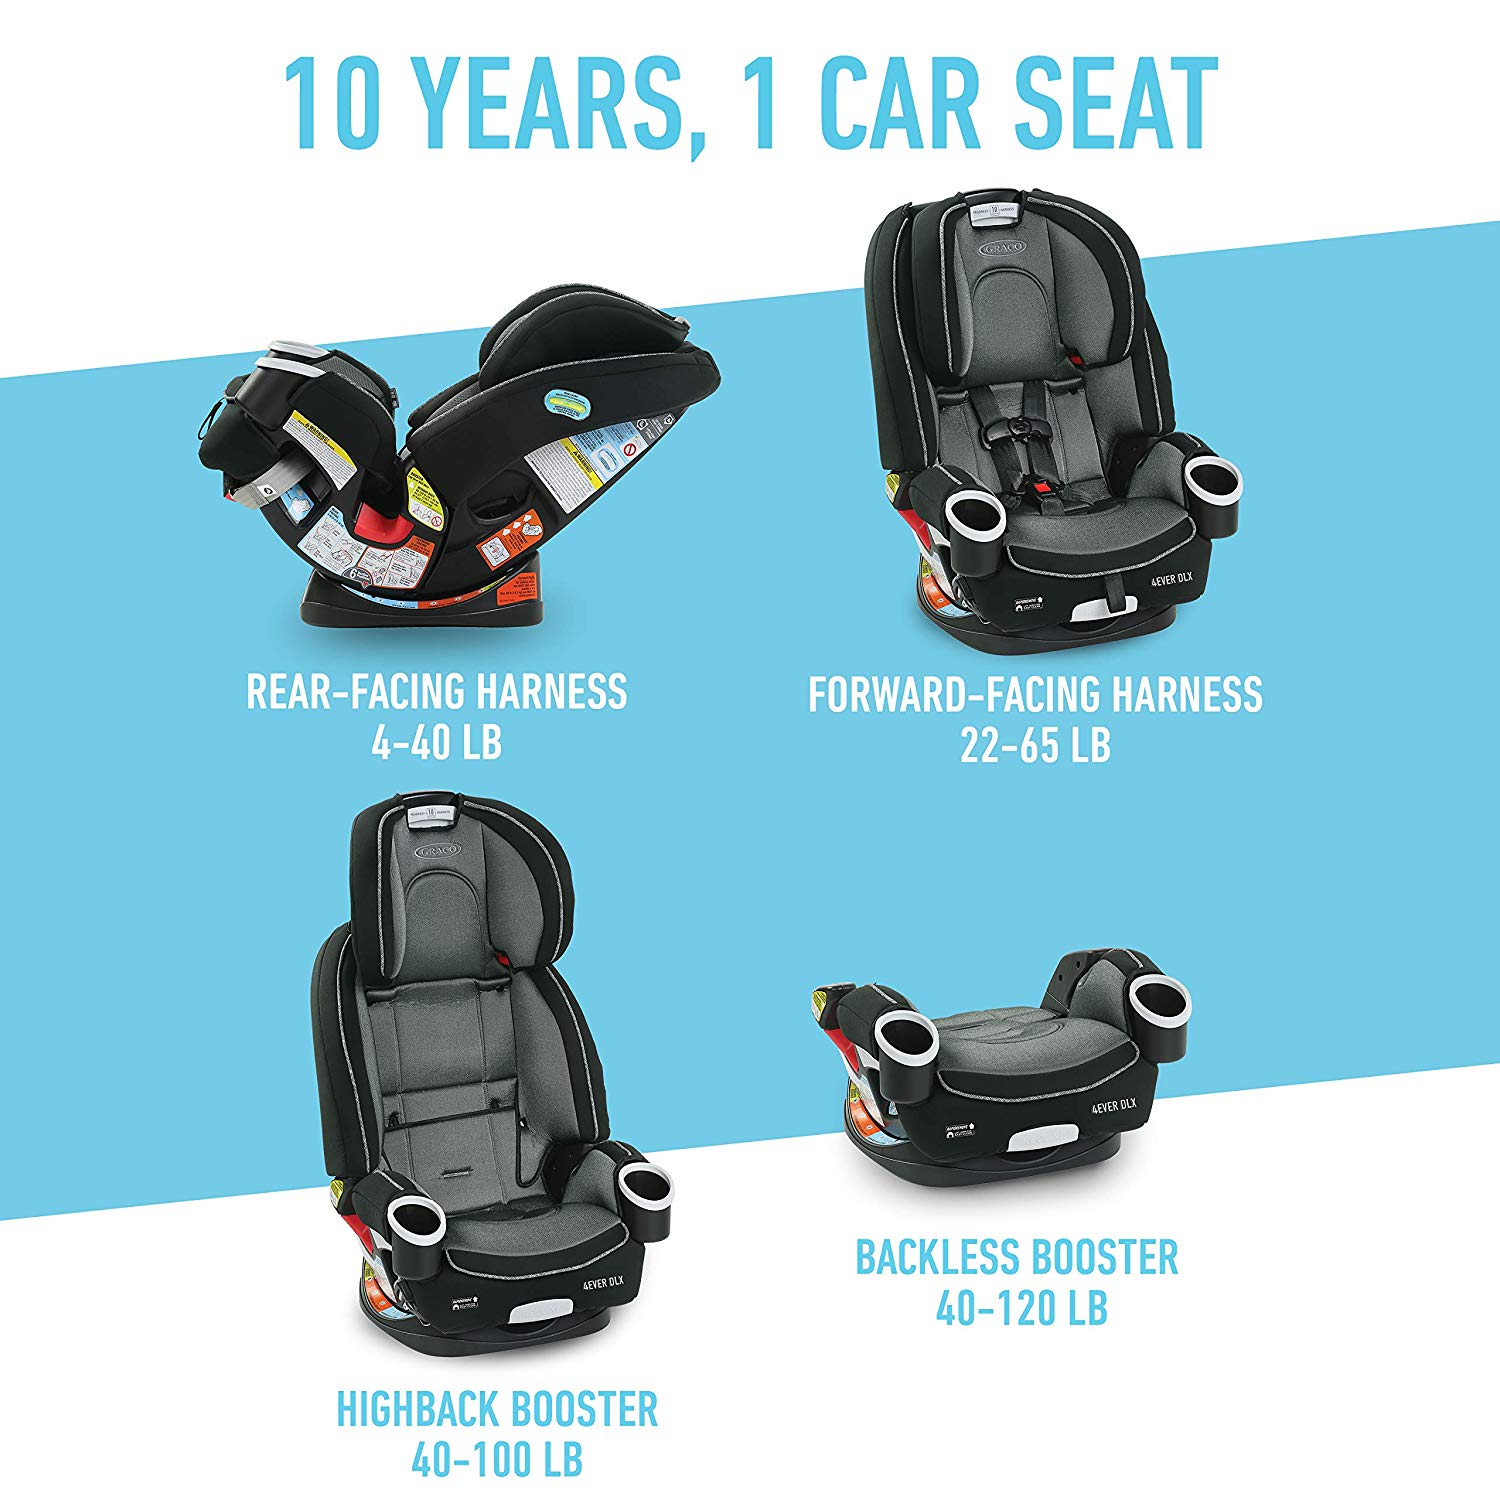 graco all in 1 car seat